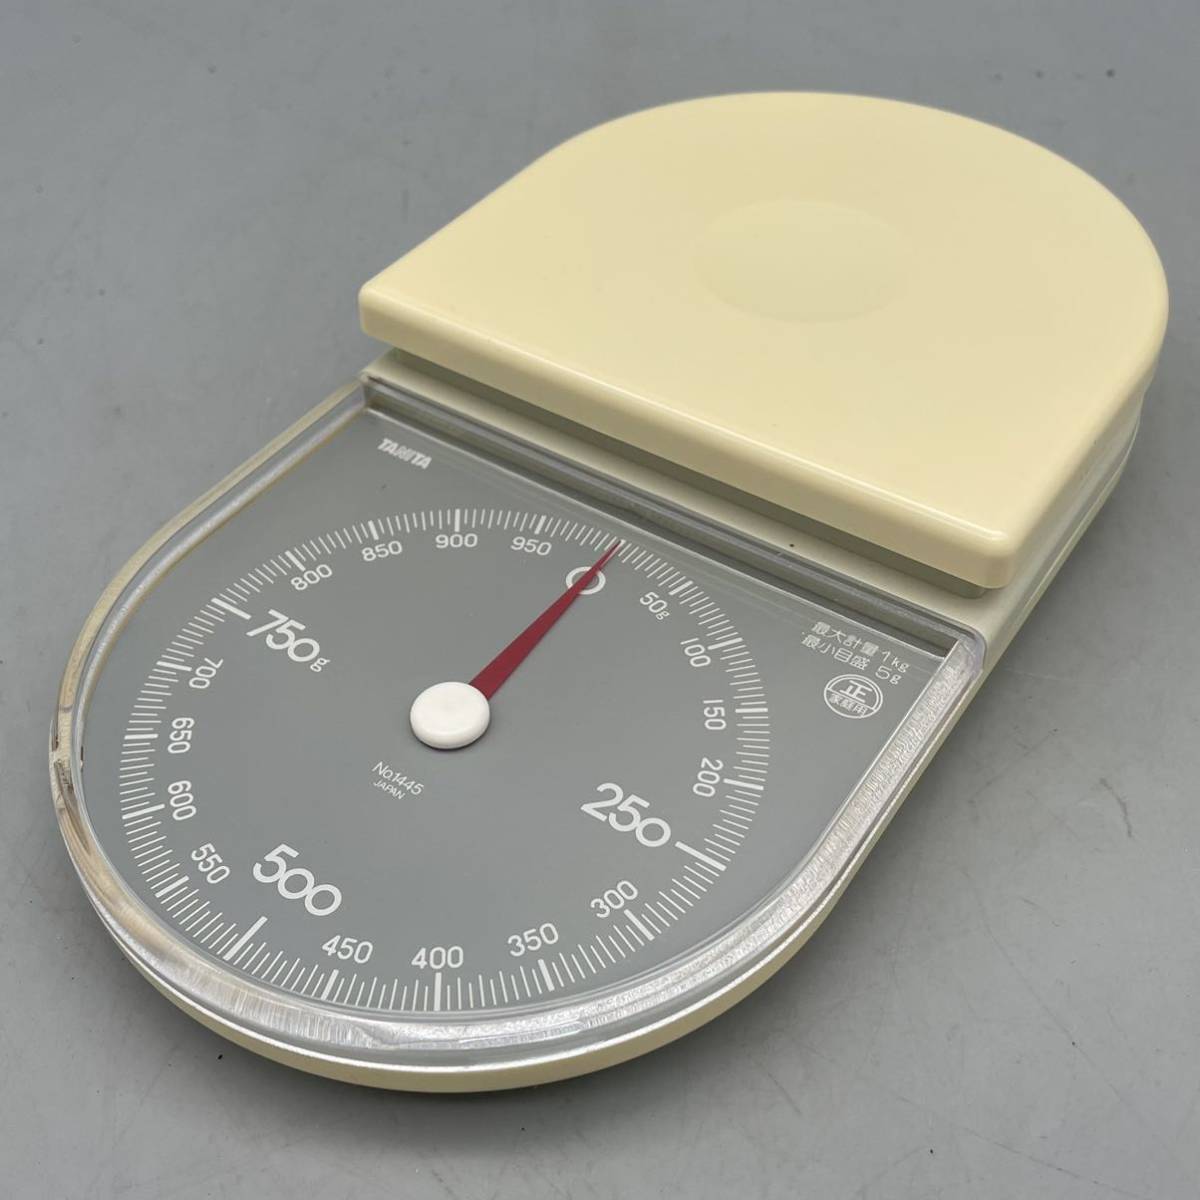 TANITAtanita analogue measuring No.1445 cookware kitchen scale ... amount scales amount 1kg 1000g most small scale 5g measuring device measuring instrument Japan made in Japan 